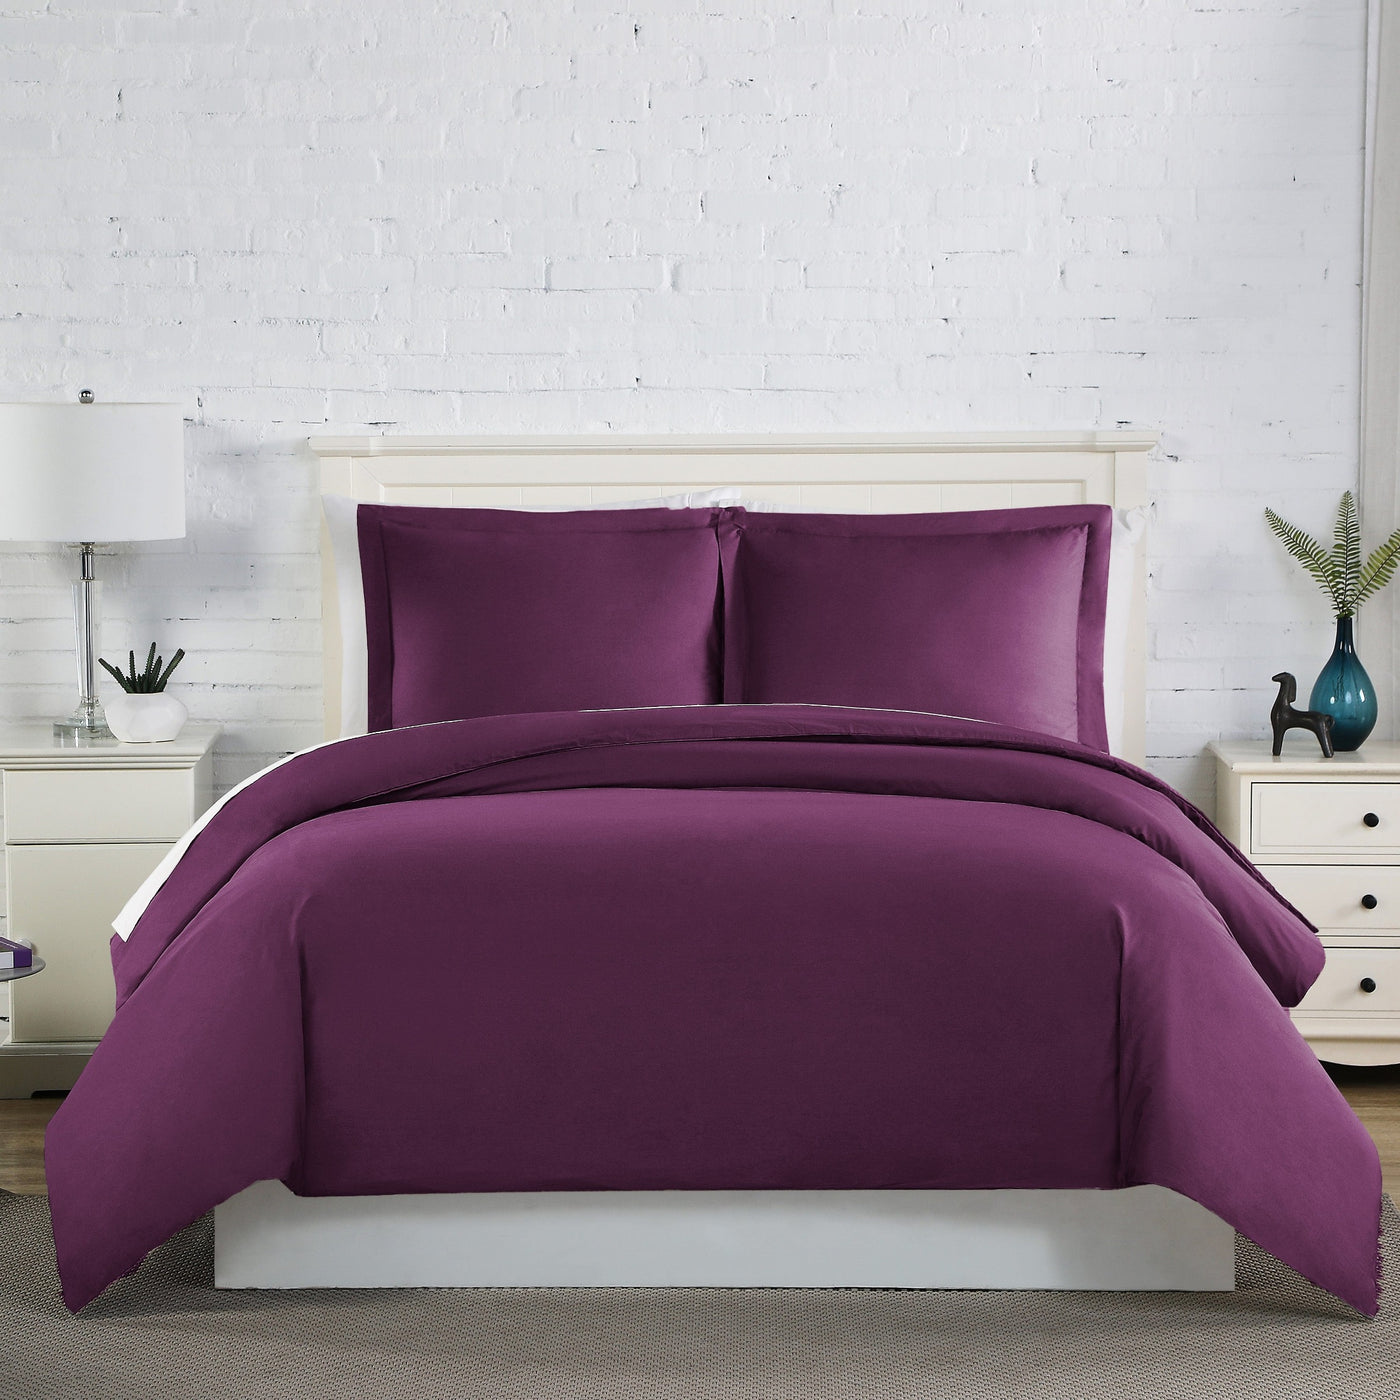 Front View of Everyday Essentials Duvet Cover Set in Purple#color_purple